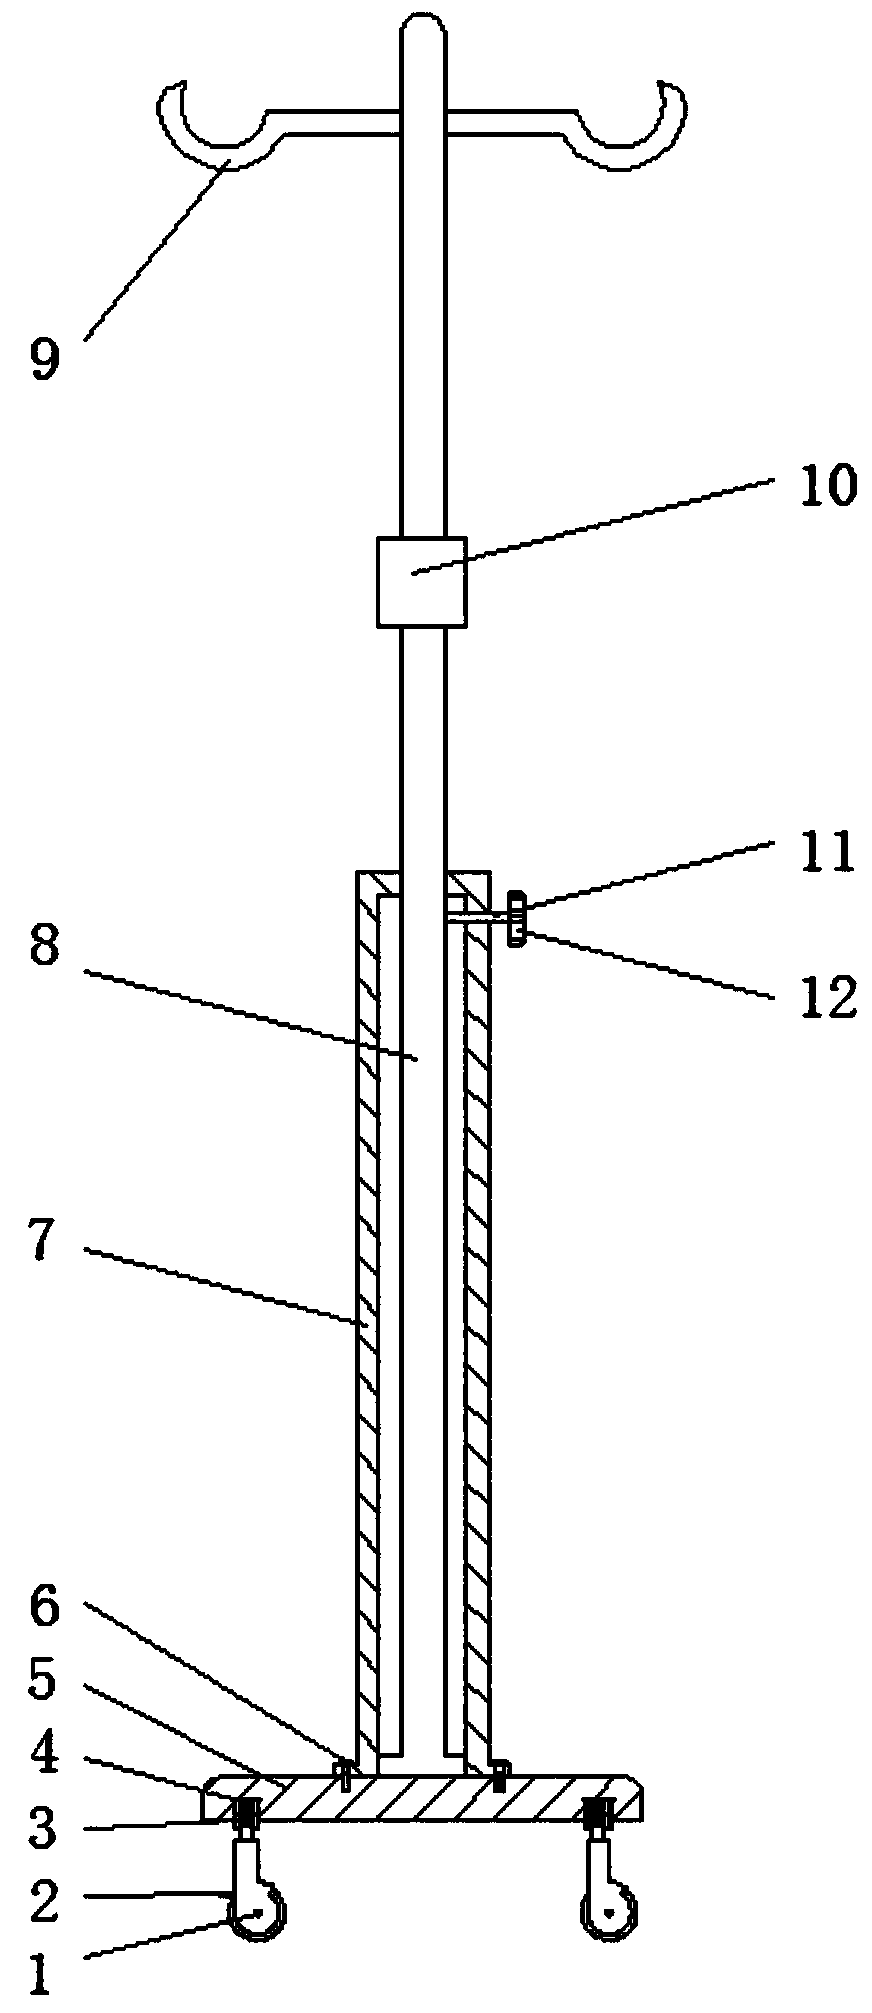 Medical infusion auxiliary support provided with adjusting structure